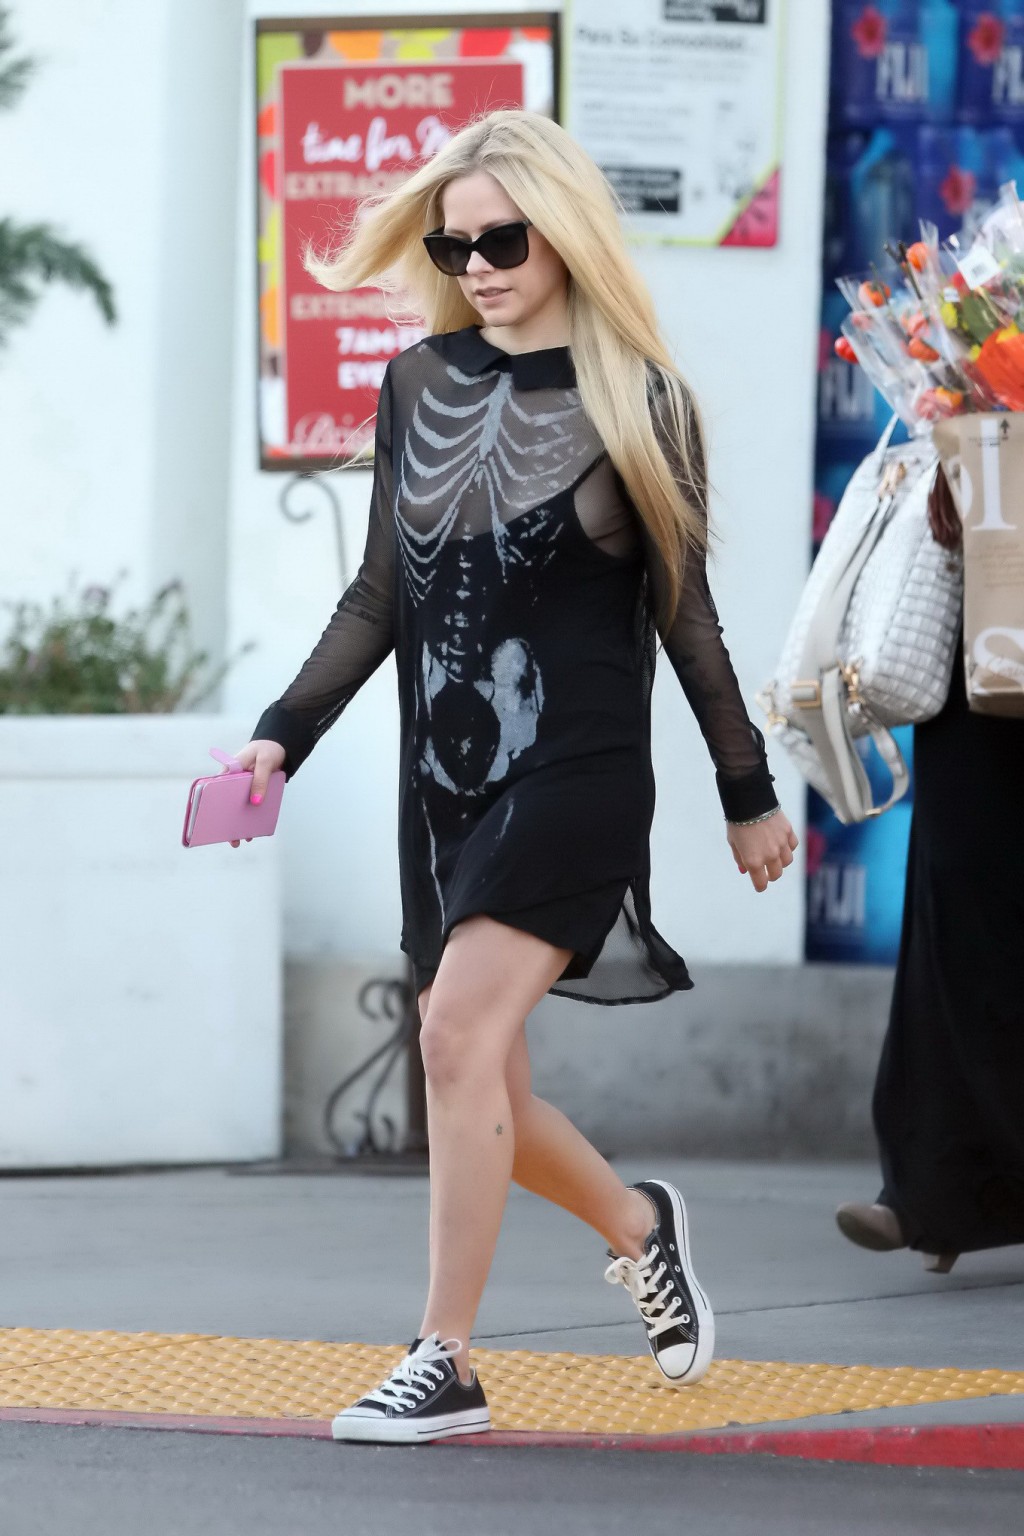 Avril Lavigne skeleton costume malfunction and ass show #75150904